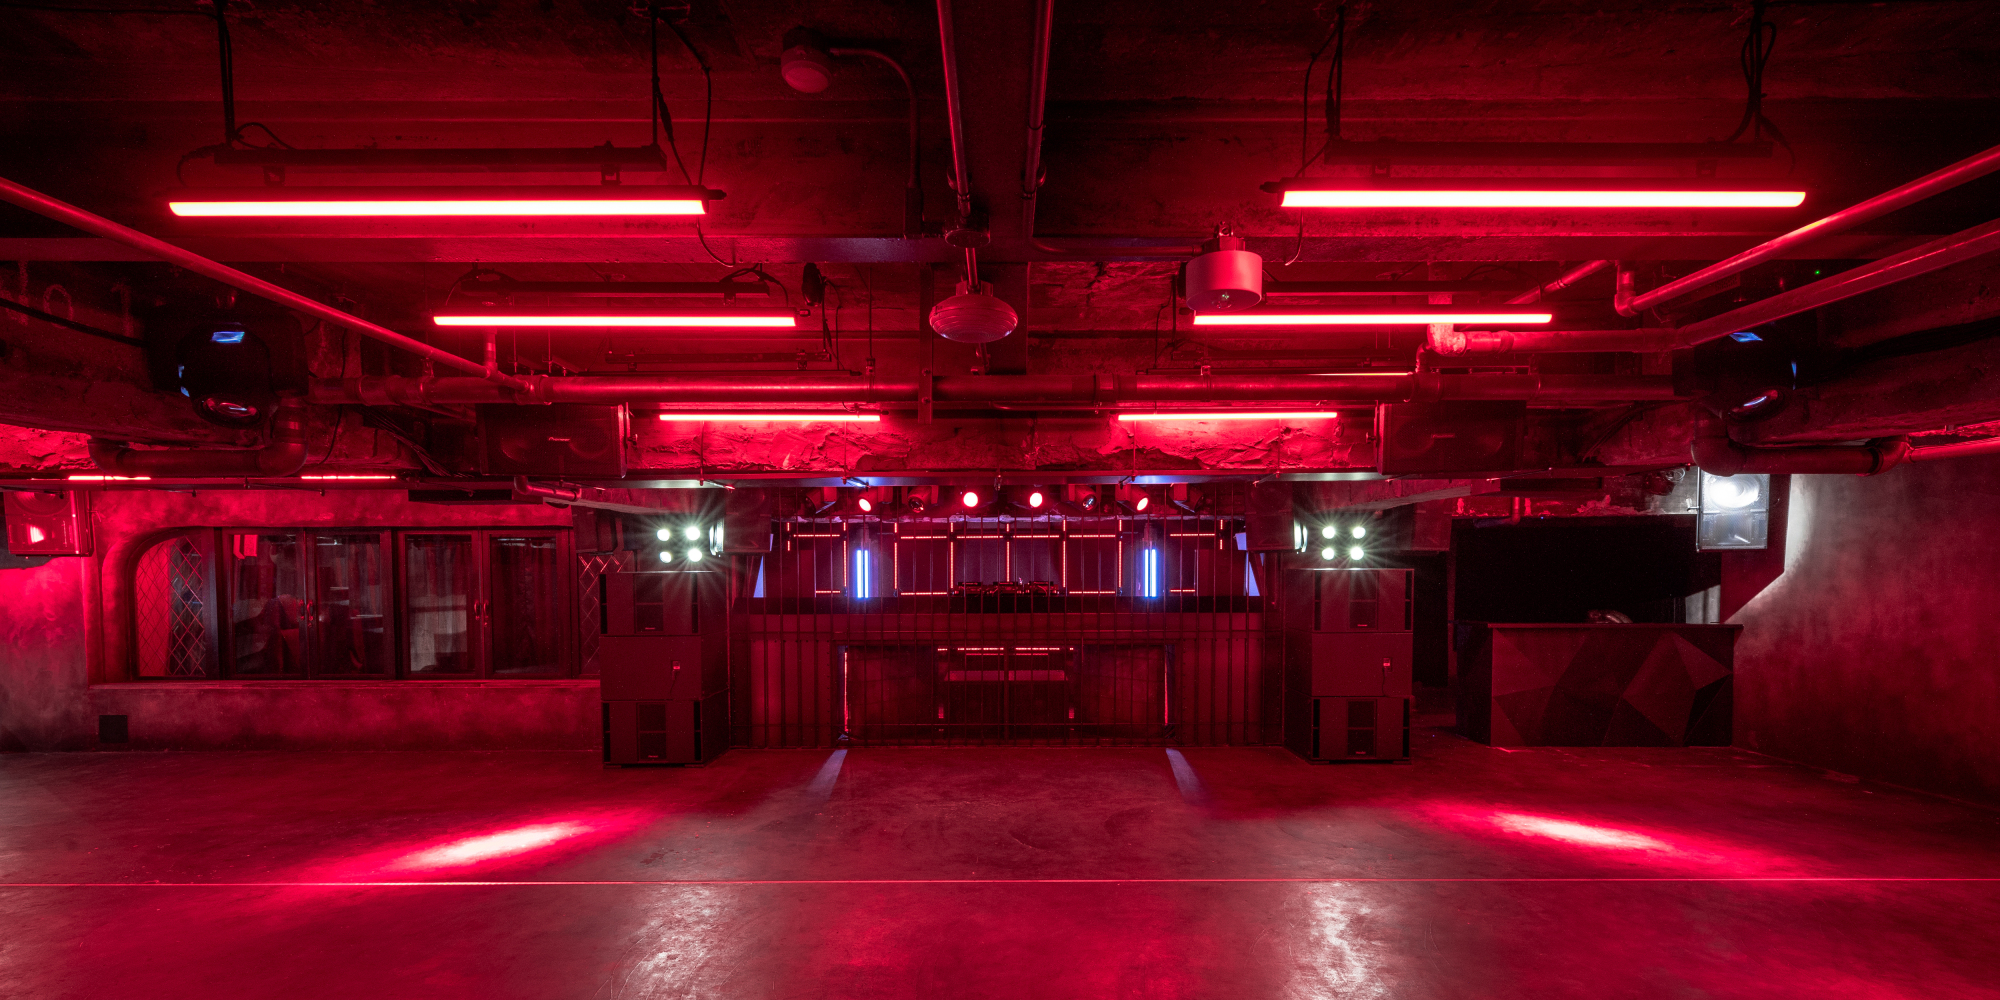 Empty no longer: The dancefloor at a new club, Alzar, awaits customers before opening. While nightclubs in Osaka have had their share of legal issues over the past few years, changes in legislation have led some in the music scene there to be more optimistic as to where nightlife is heading. | ISTOCK